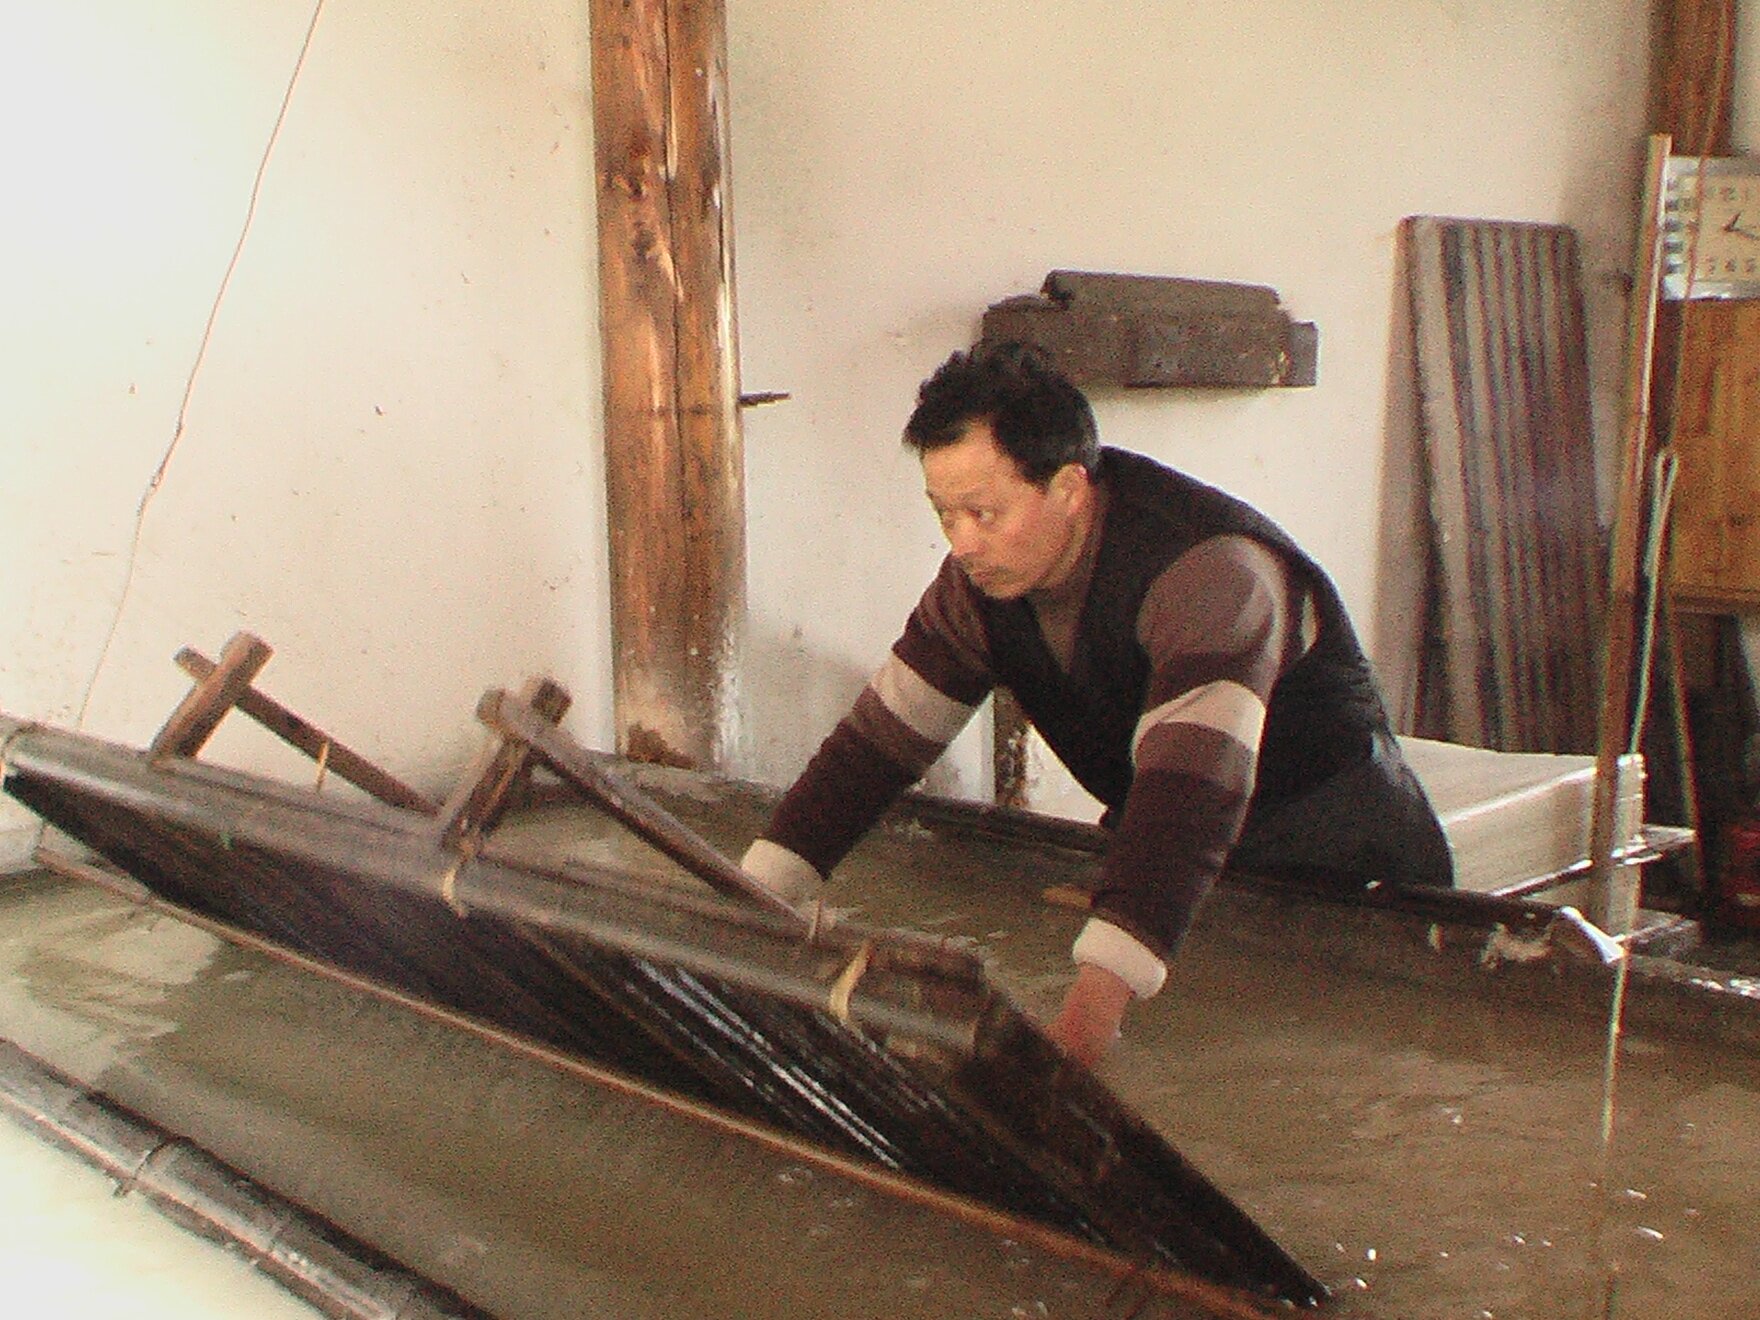 Paper making in China, the traditional way